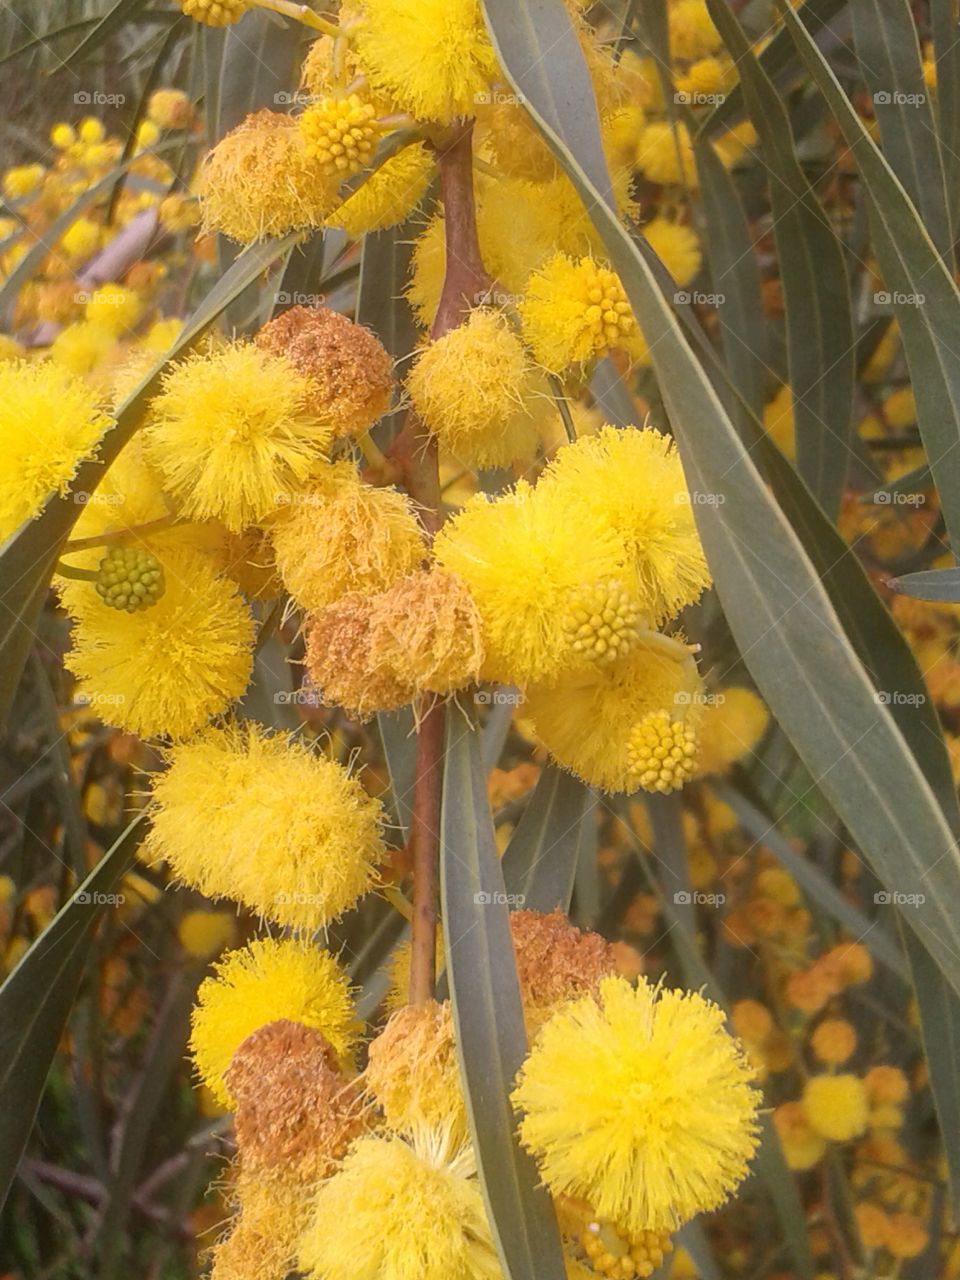 Nature in Yellow